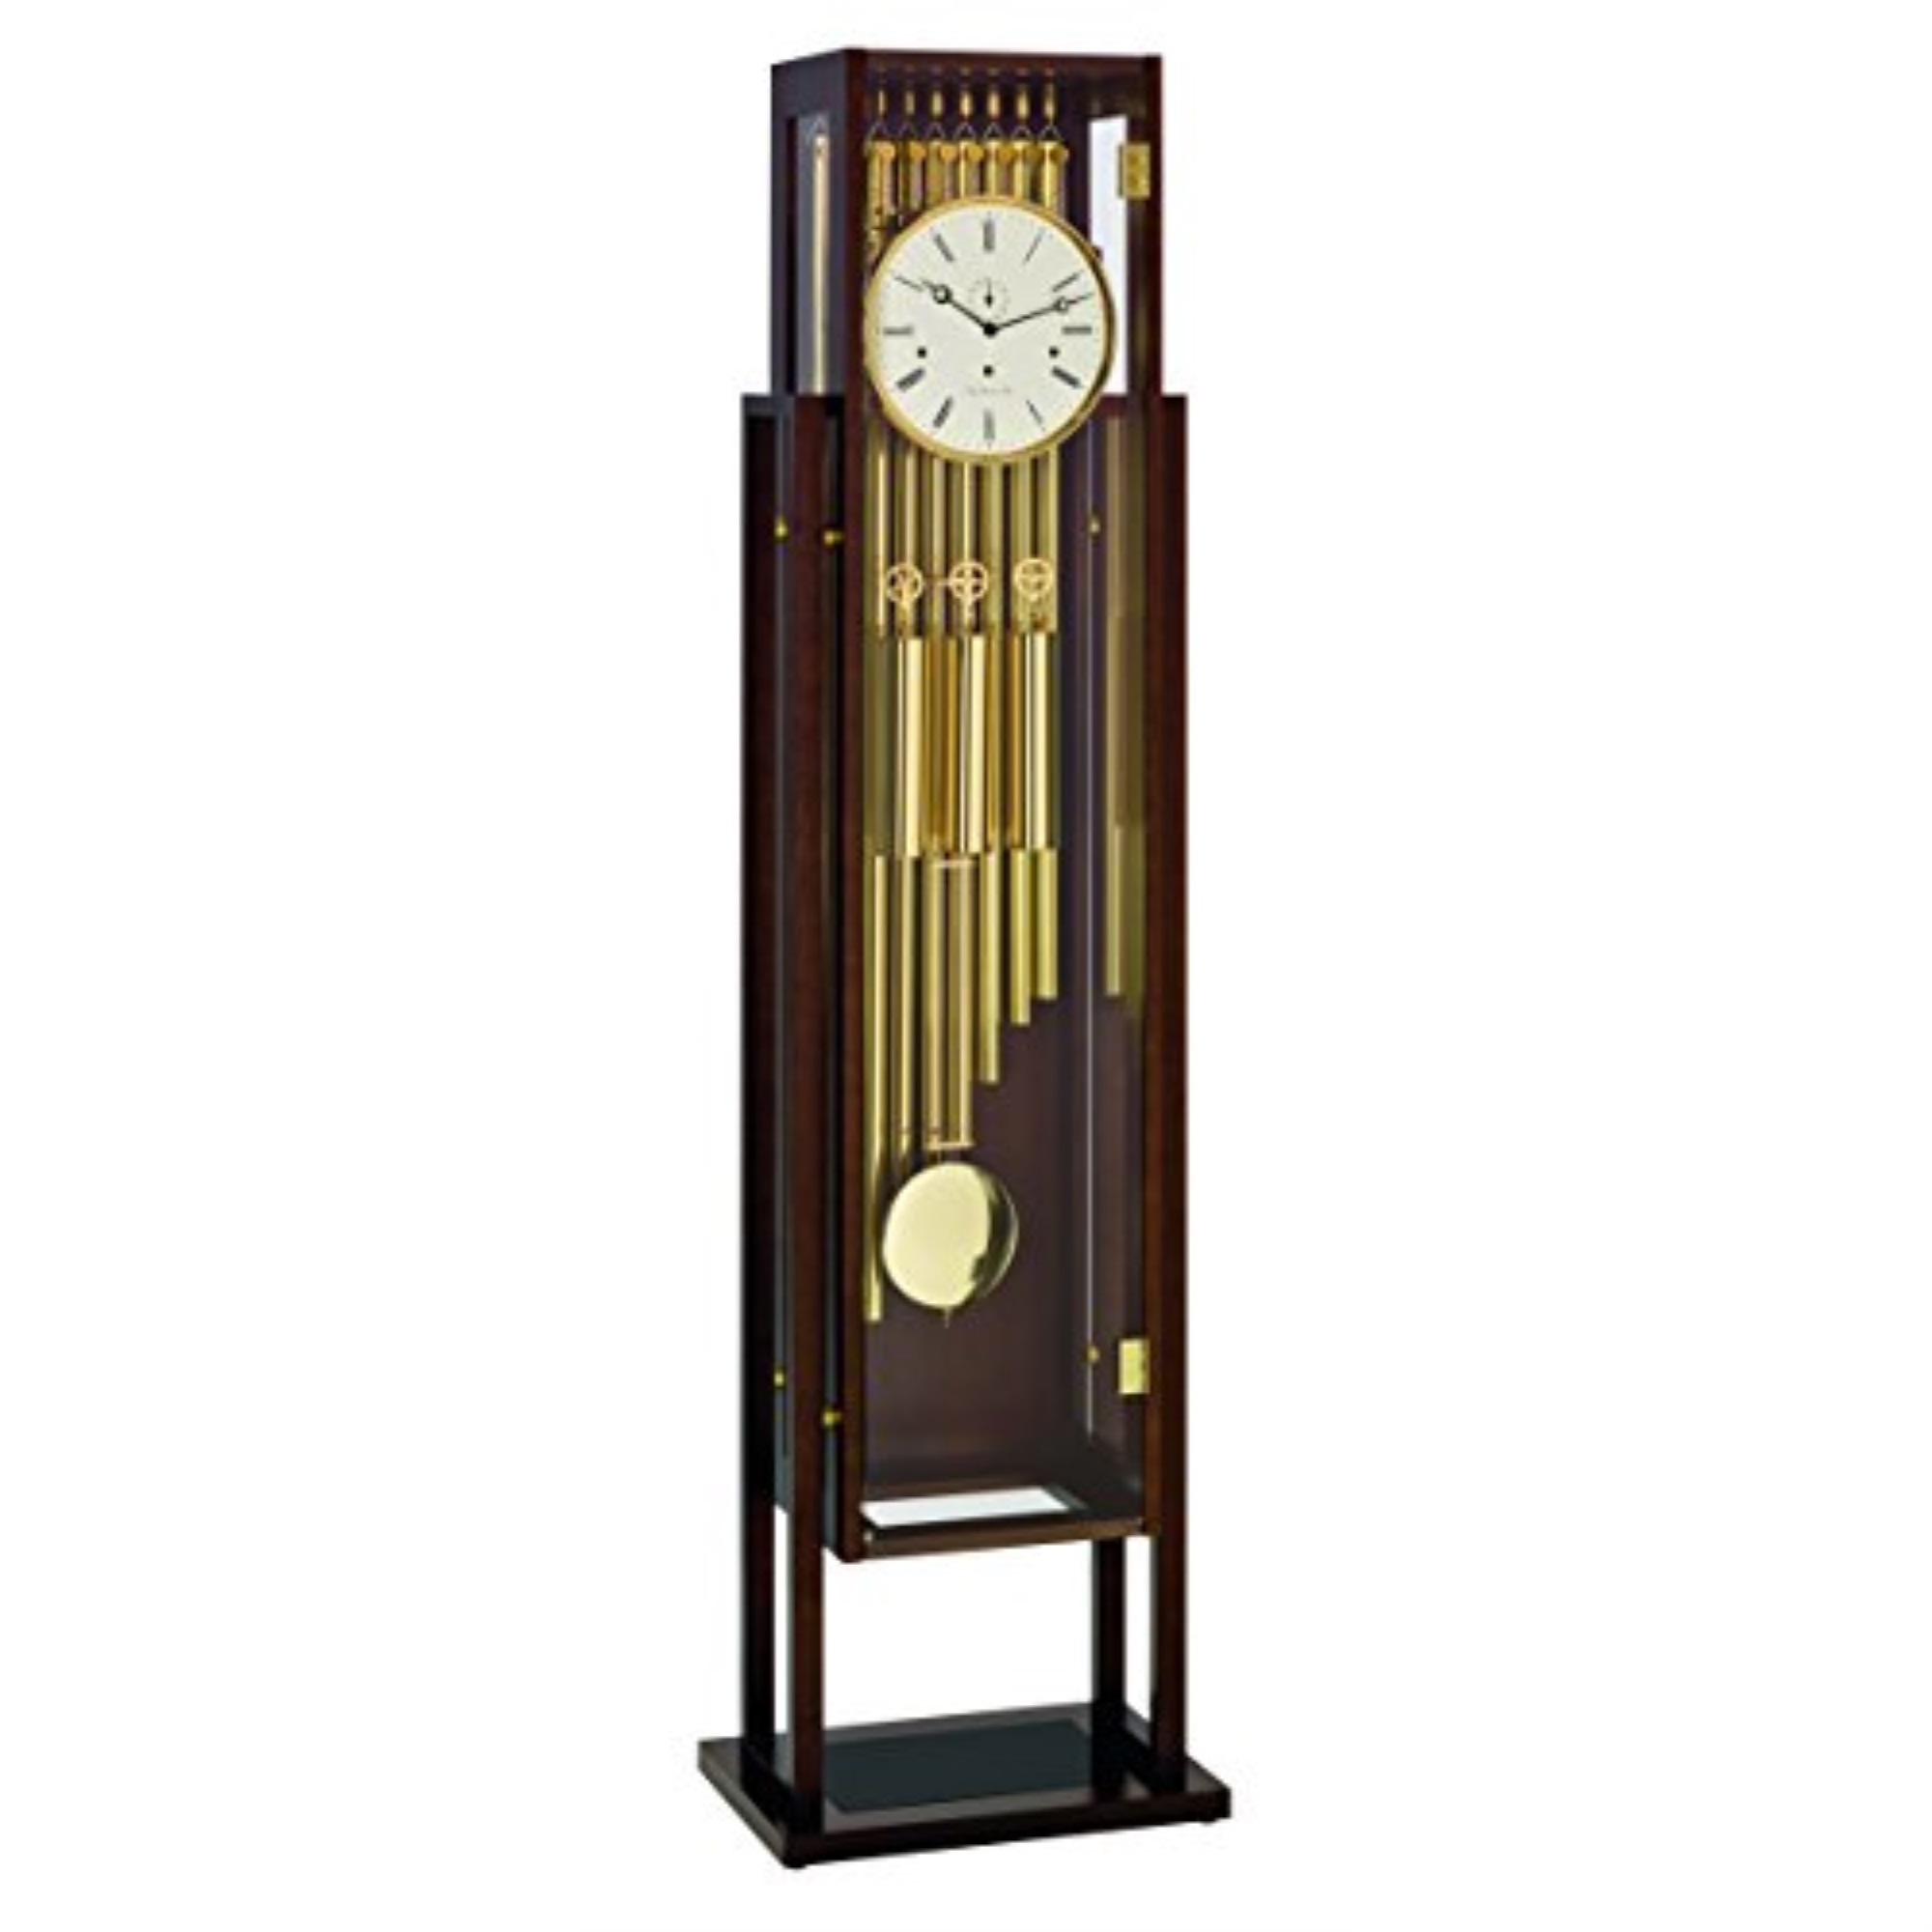 Hermle ESSEX, Ultra-modern glass sided walnut case showcases the stunning 8 day, triple chime, tubular movement.